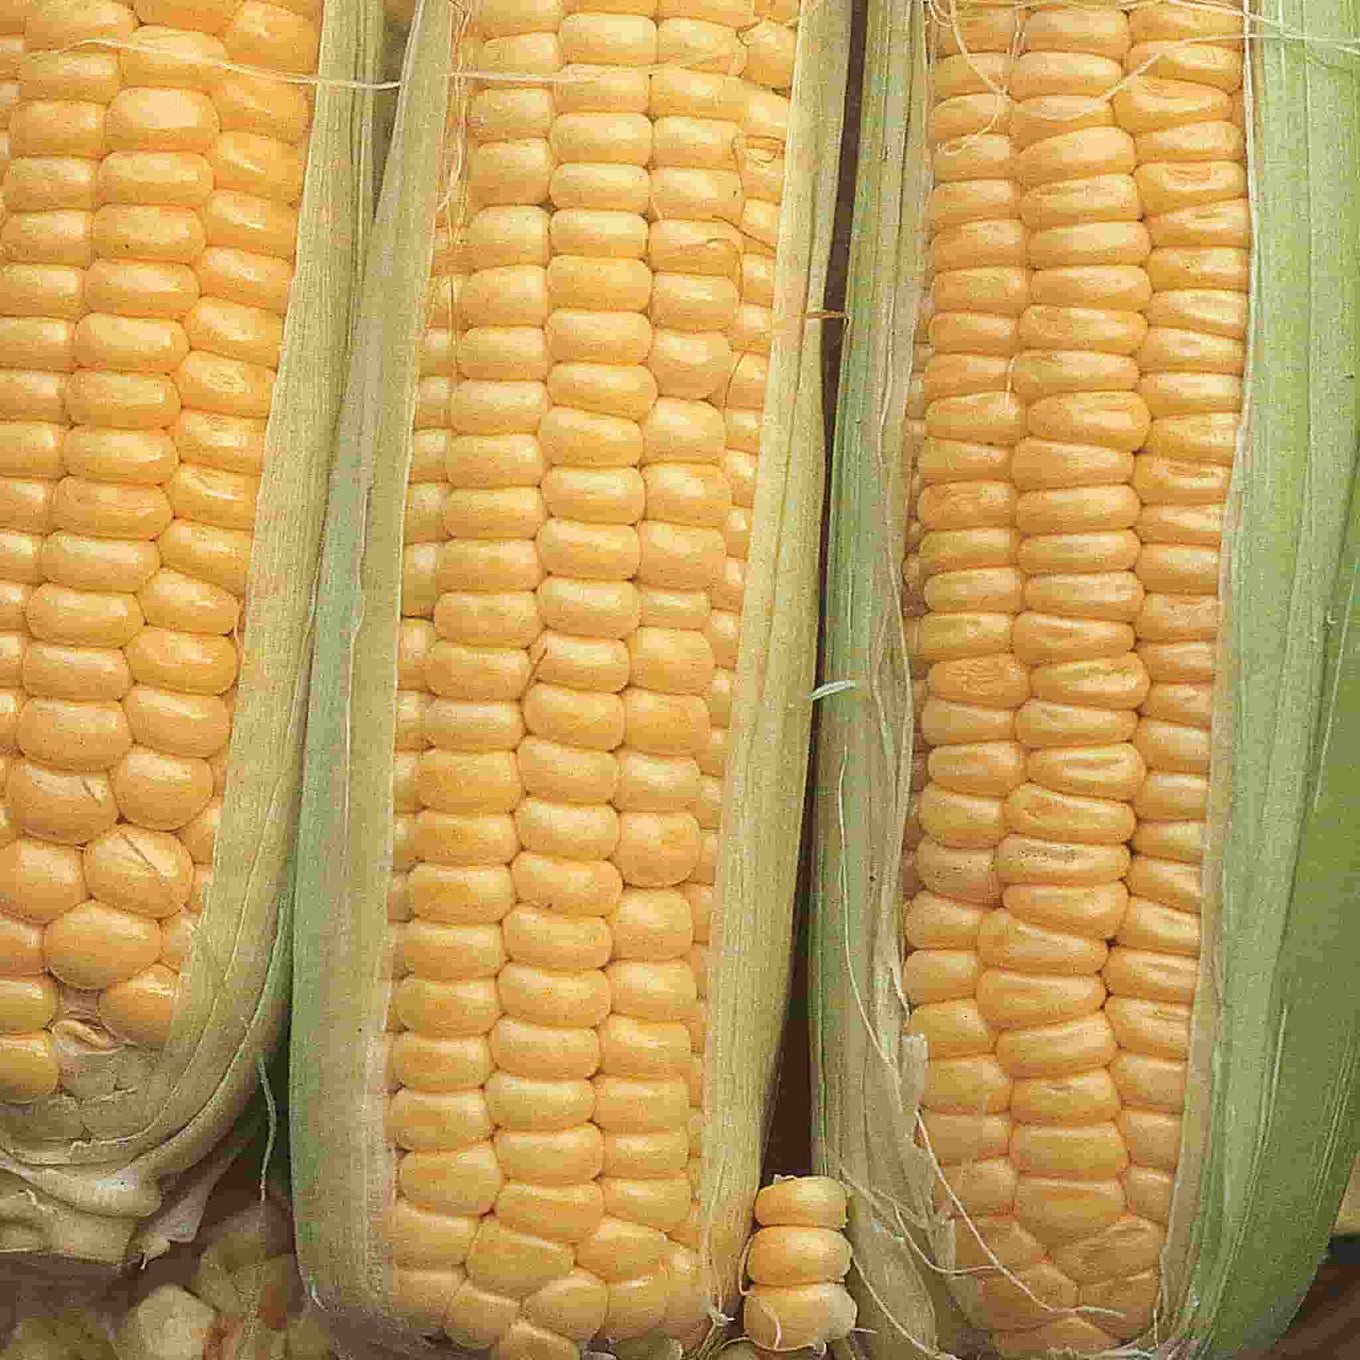 Golden Cross Bantam Hybrid Sweet Corn seeds from Ferry Morse, fully matured and harvested, photo shows corn ear closeup with husk open to show kernels.